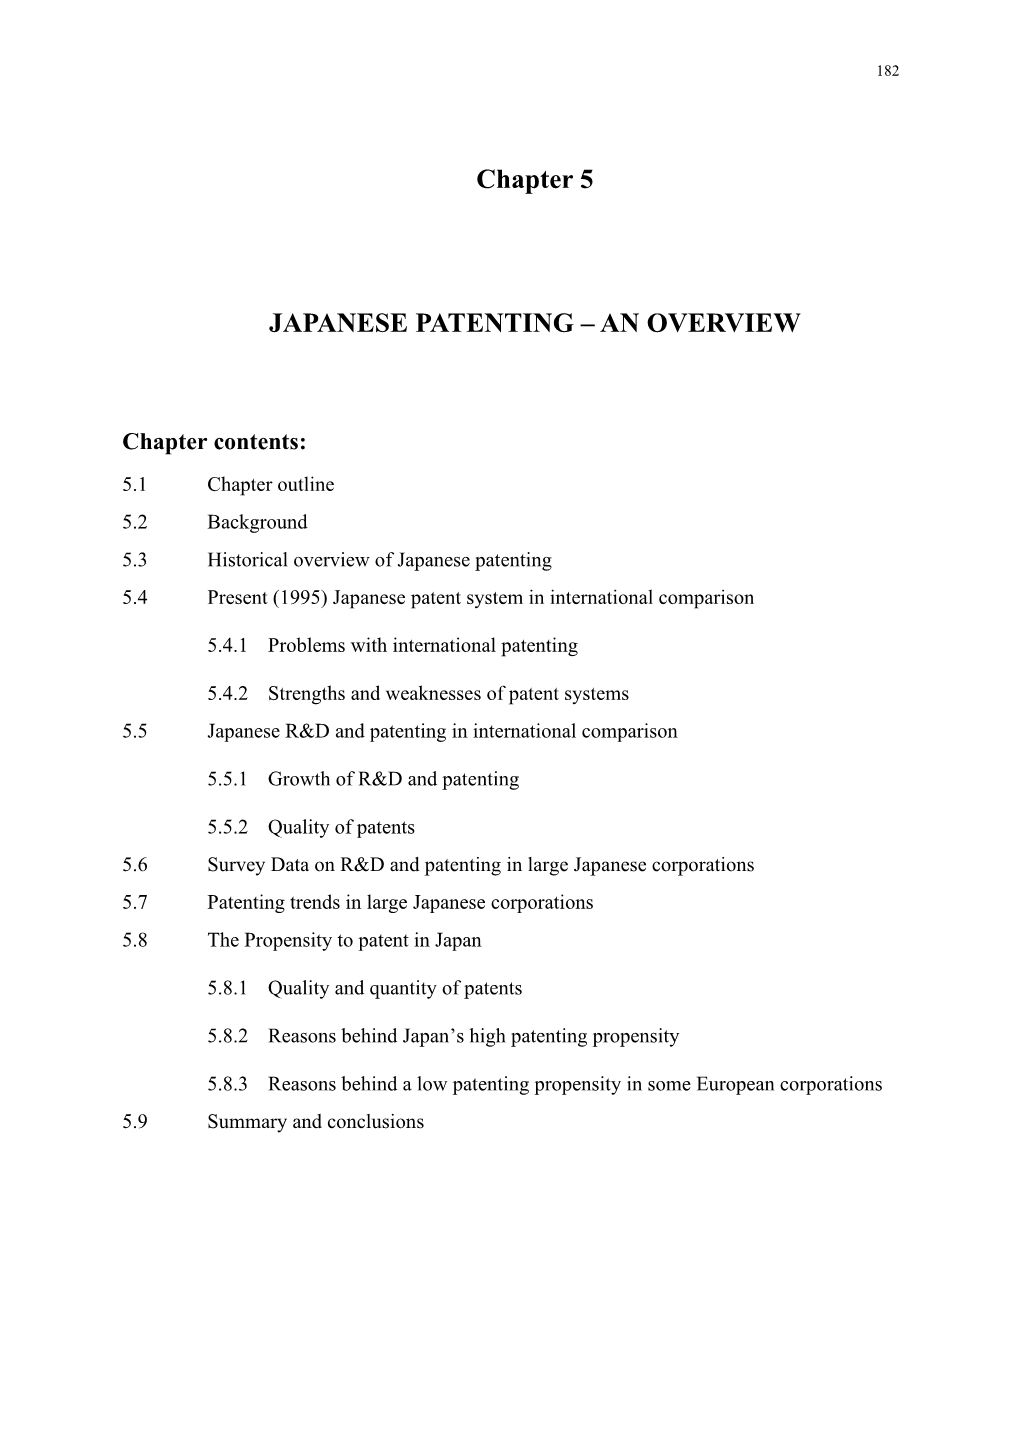 Chapter 5 – Japanese Patenting – an Overview